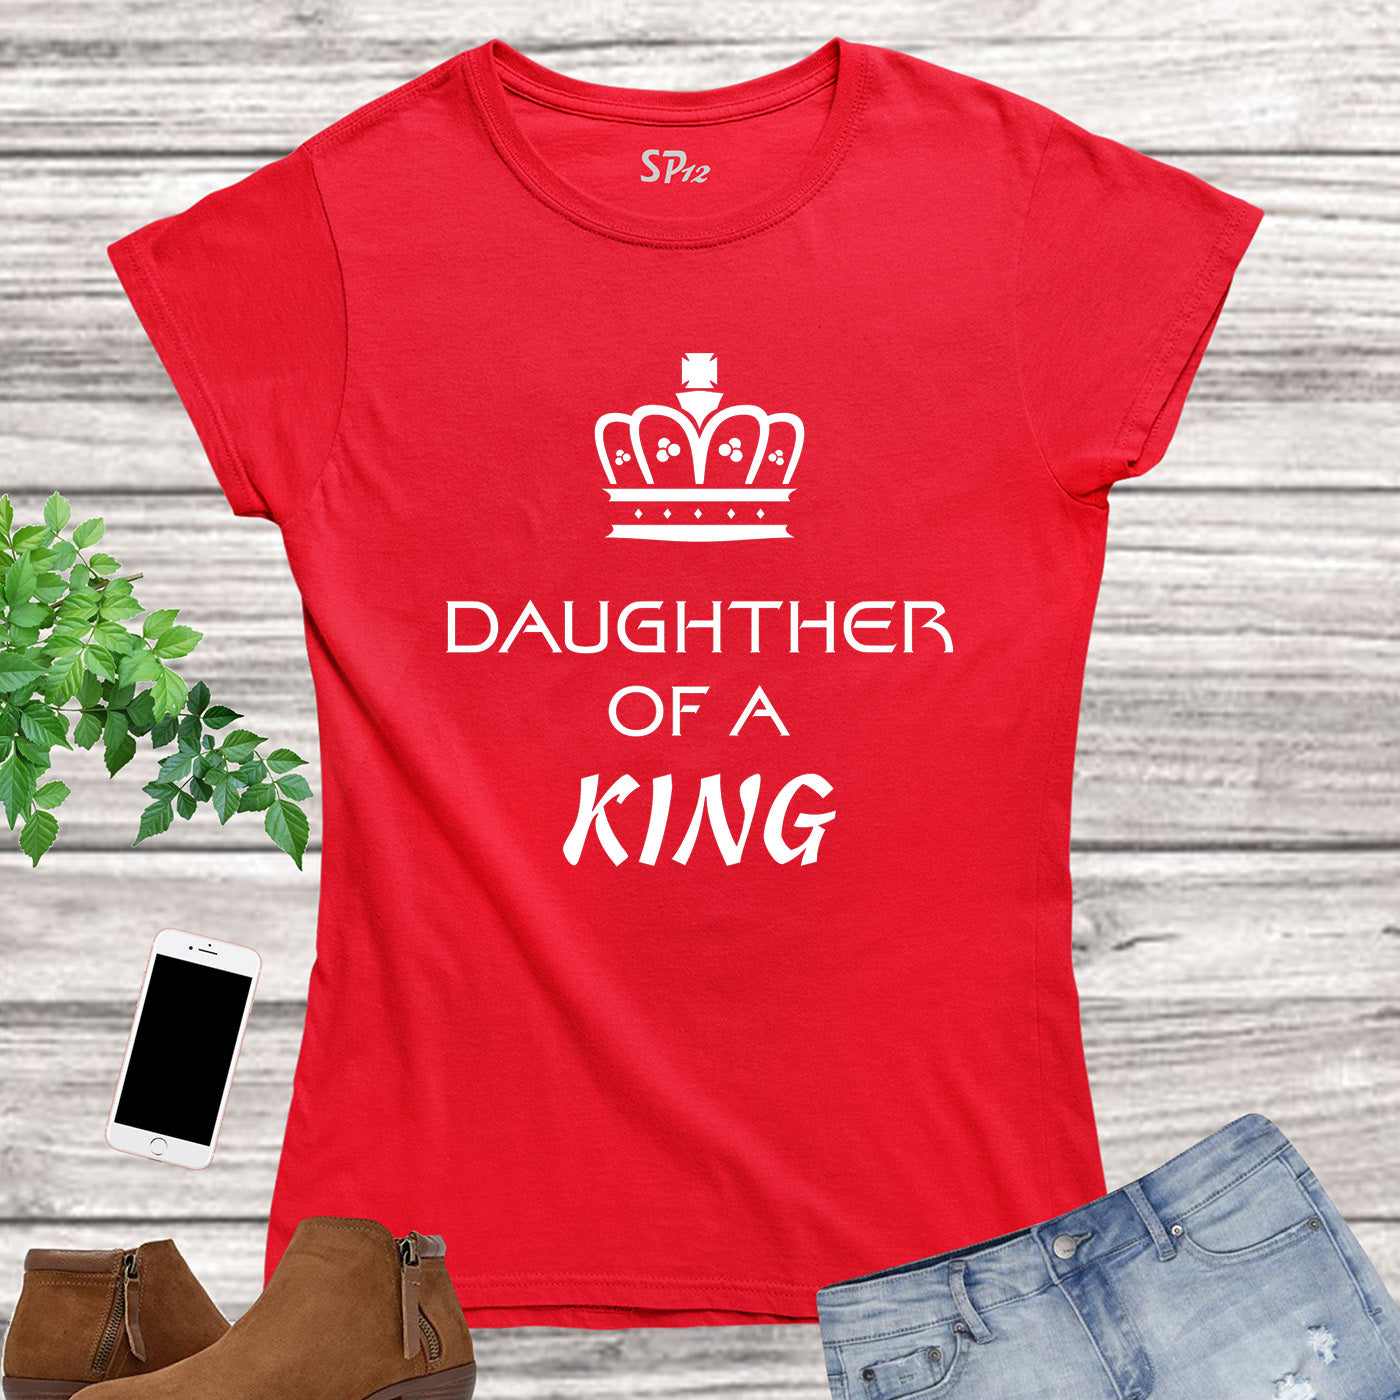 Religious Women T Shirt Daughter of a King Royal tshirts Tee